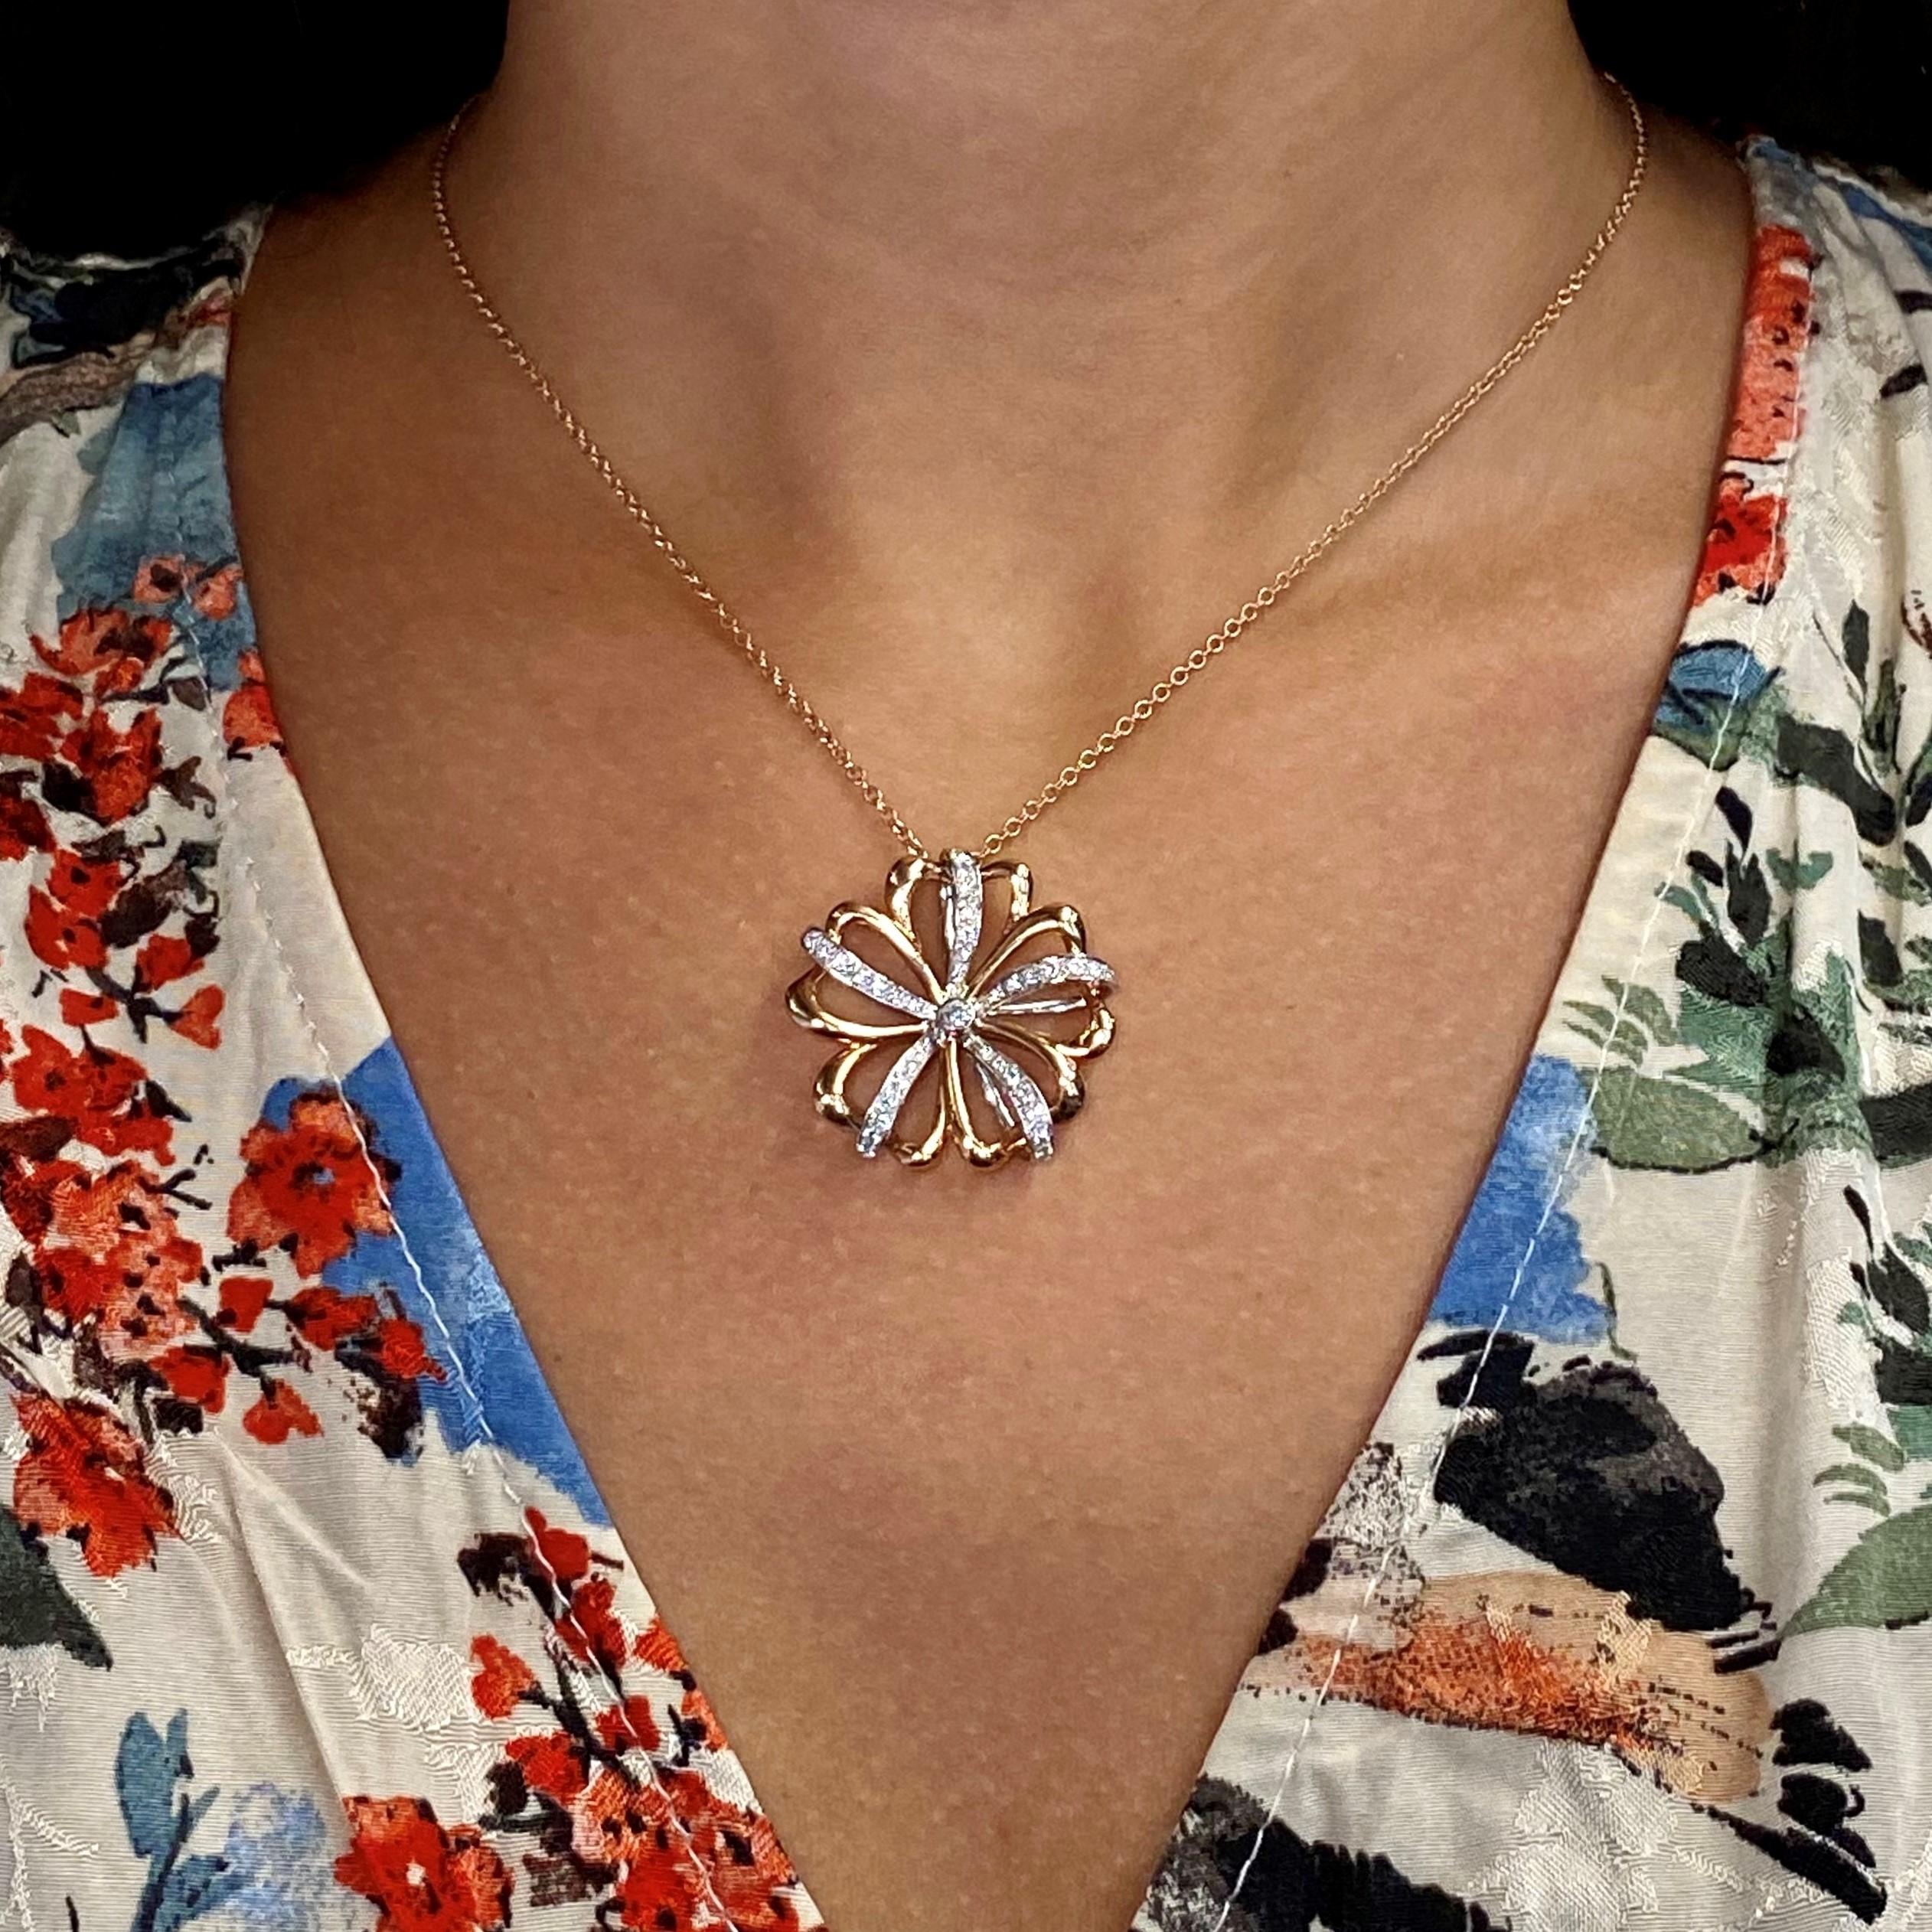 Round Cut Luca Carati Flower Pendant Necklace 18K Rose & White Gold 0.39Cttw For Sale